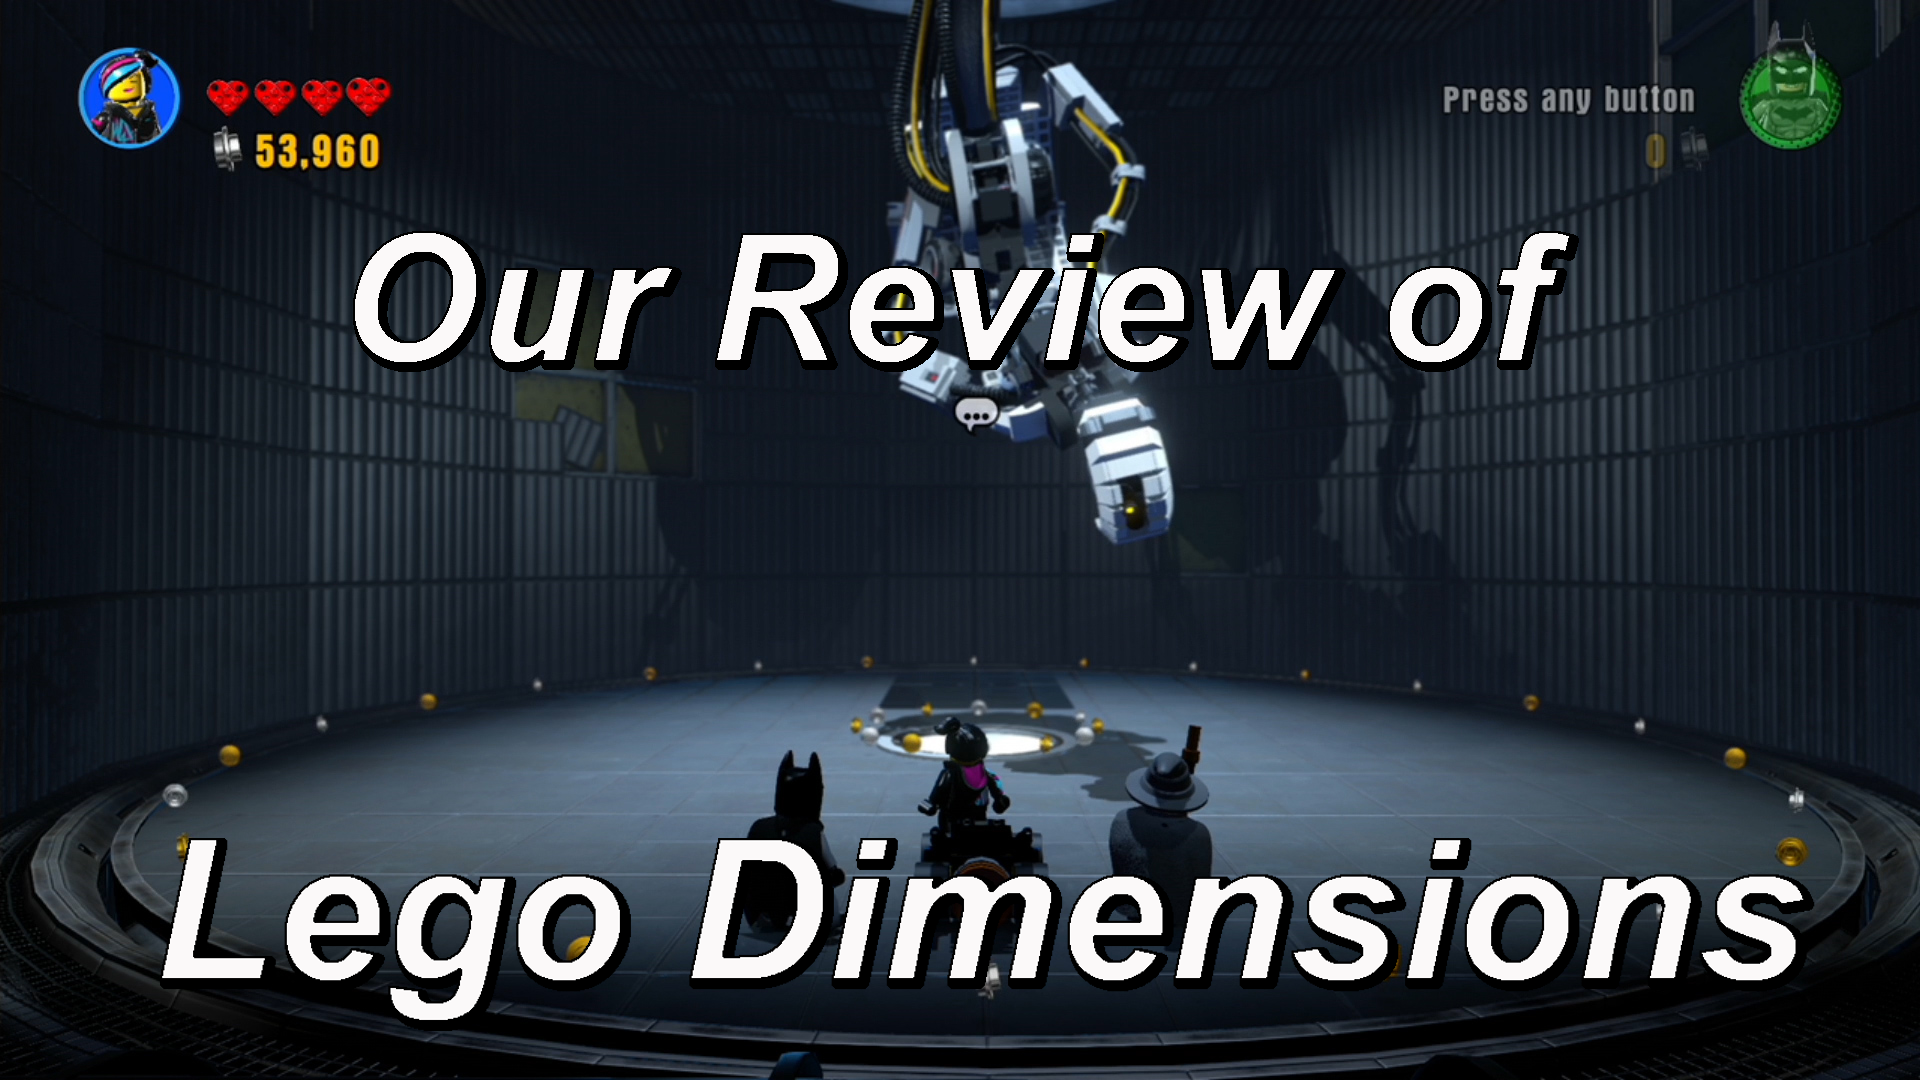 Our Review Of Lego Dimensions